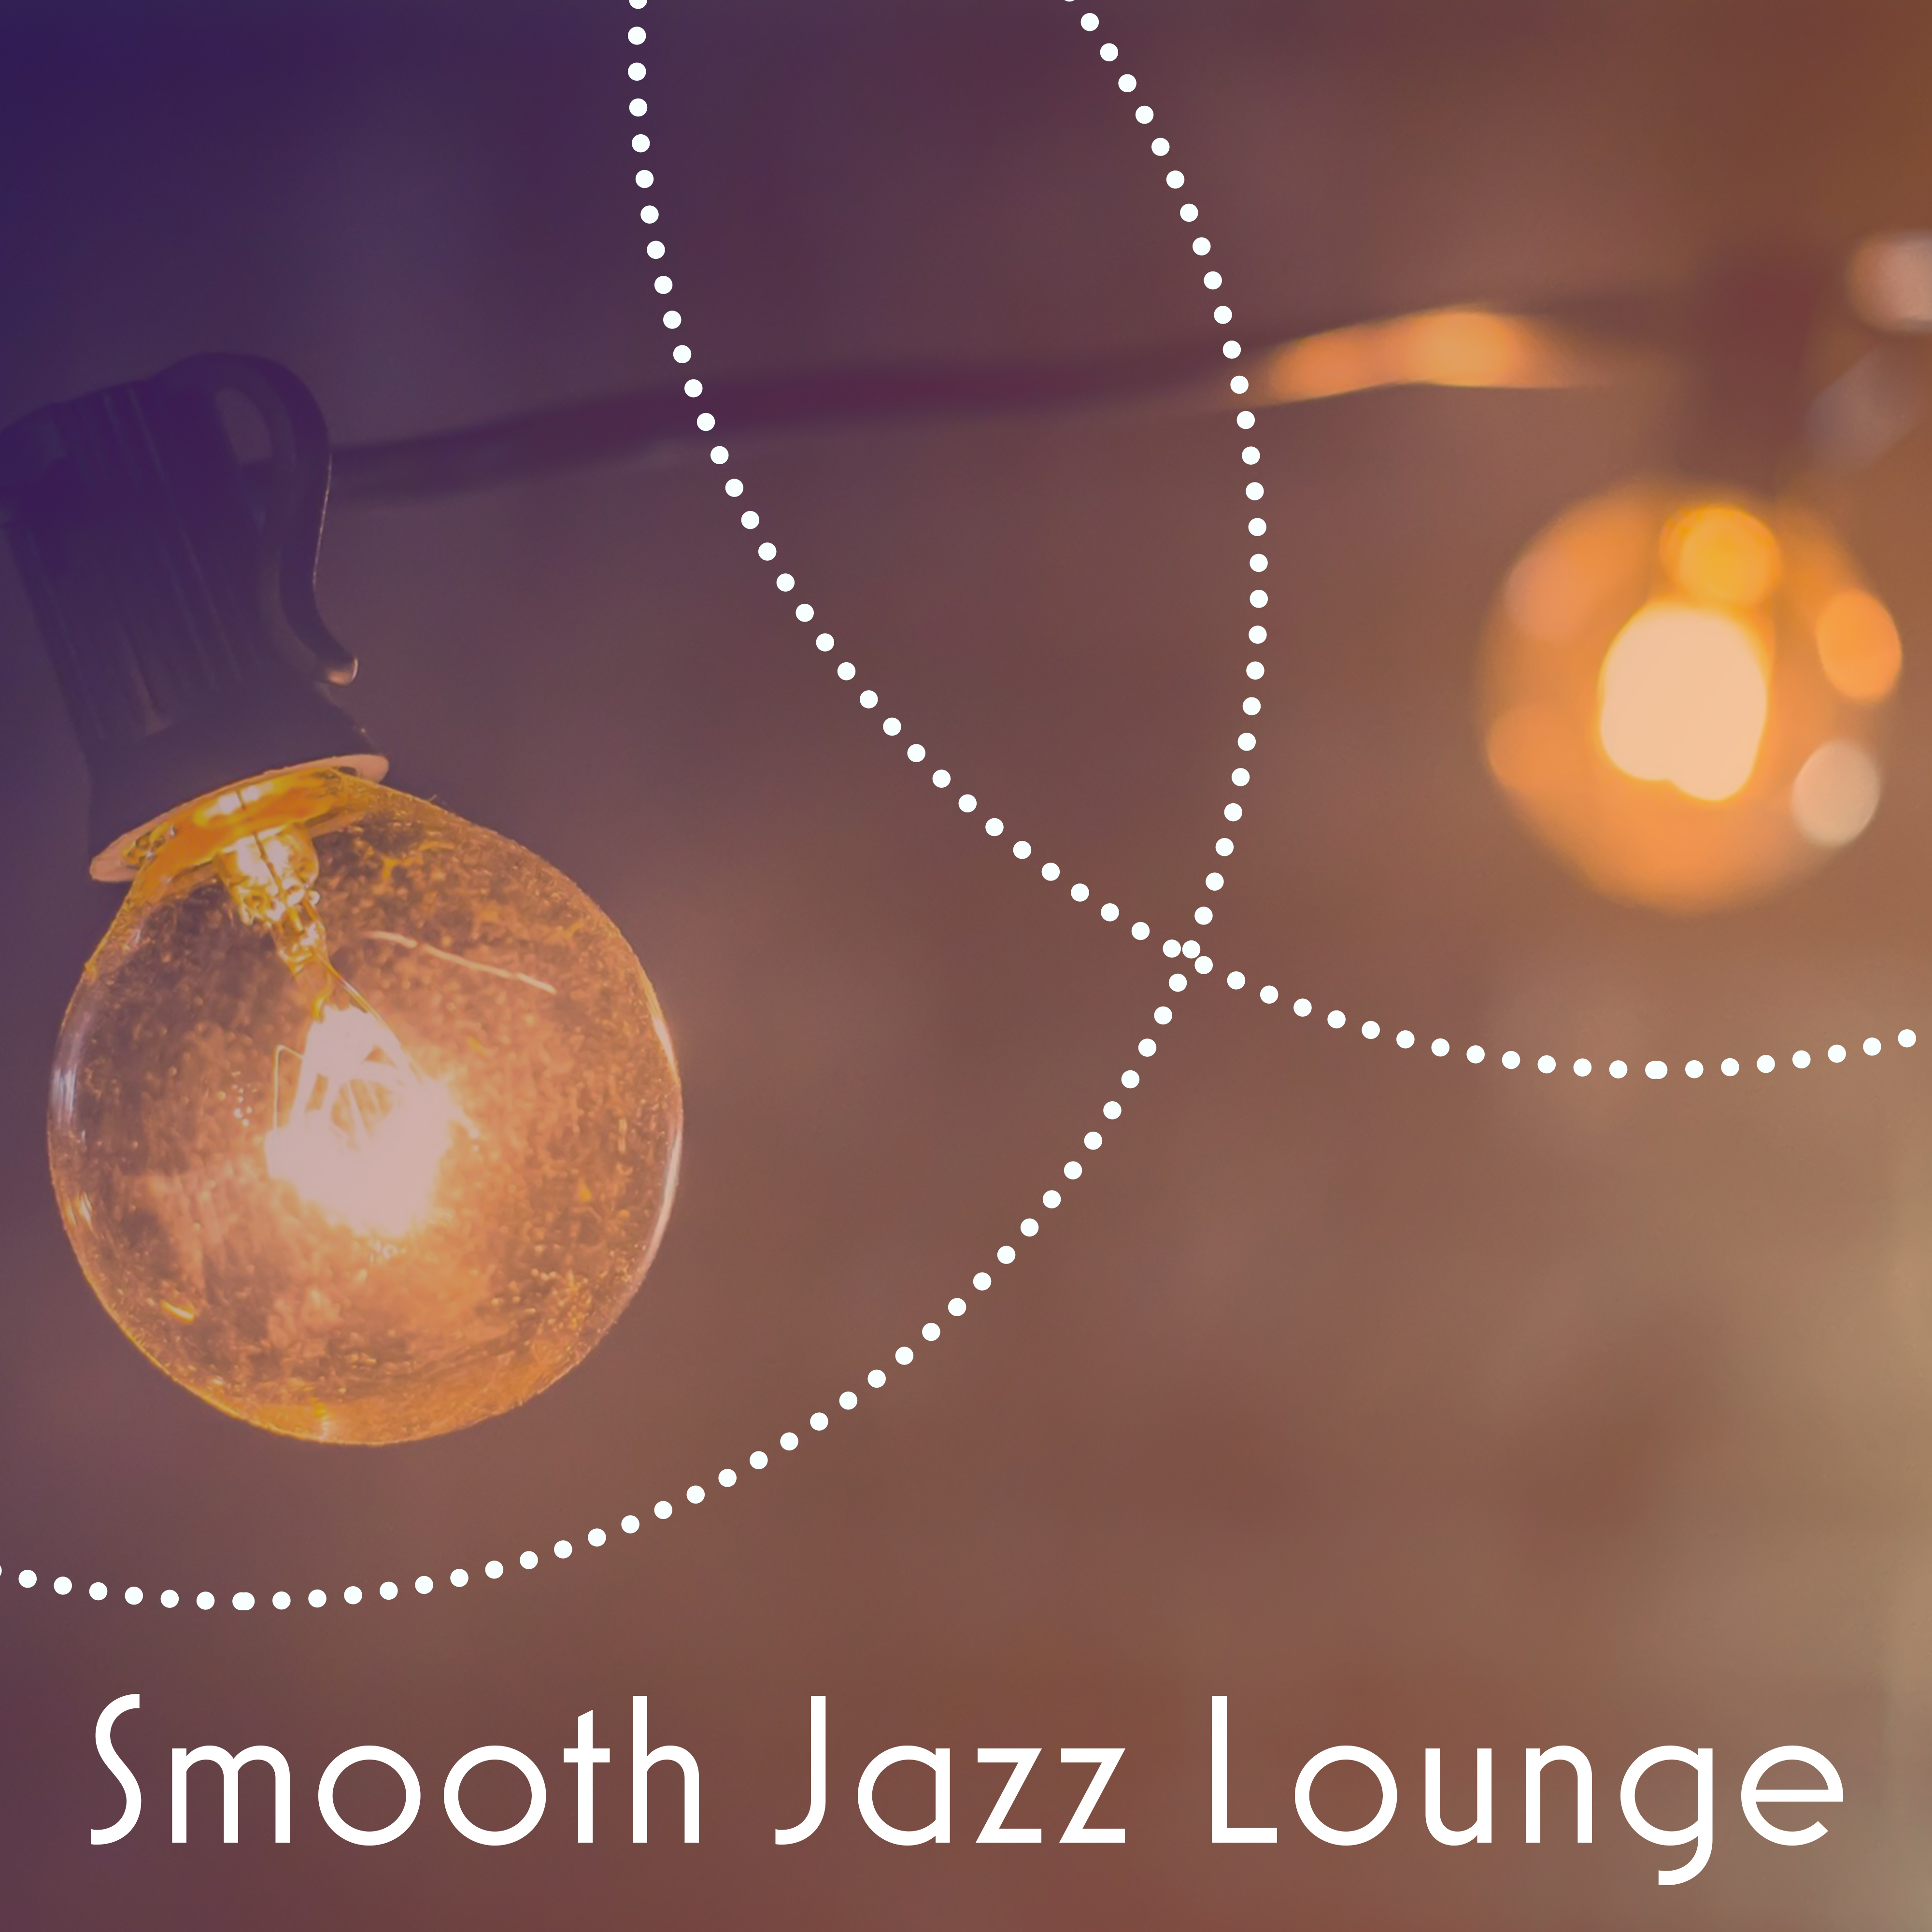 Smooth Jazz Lounge  Relaxing Piano Sounds, Gentle Piano Lounge, Simple Jazz Instrumental